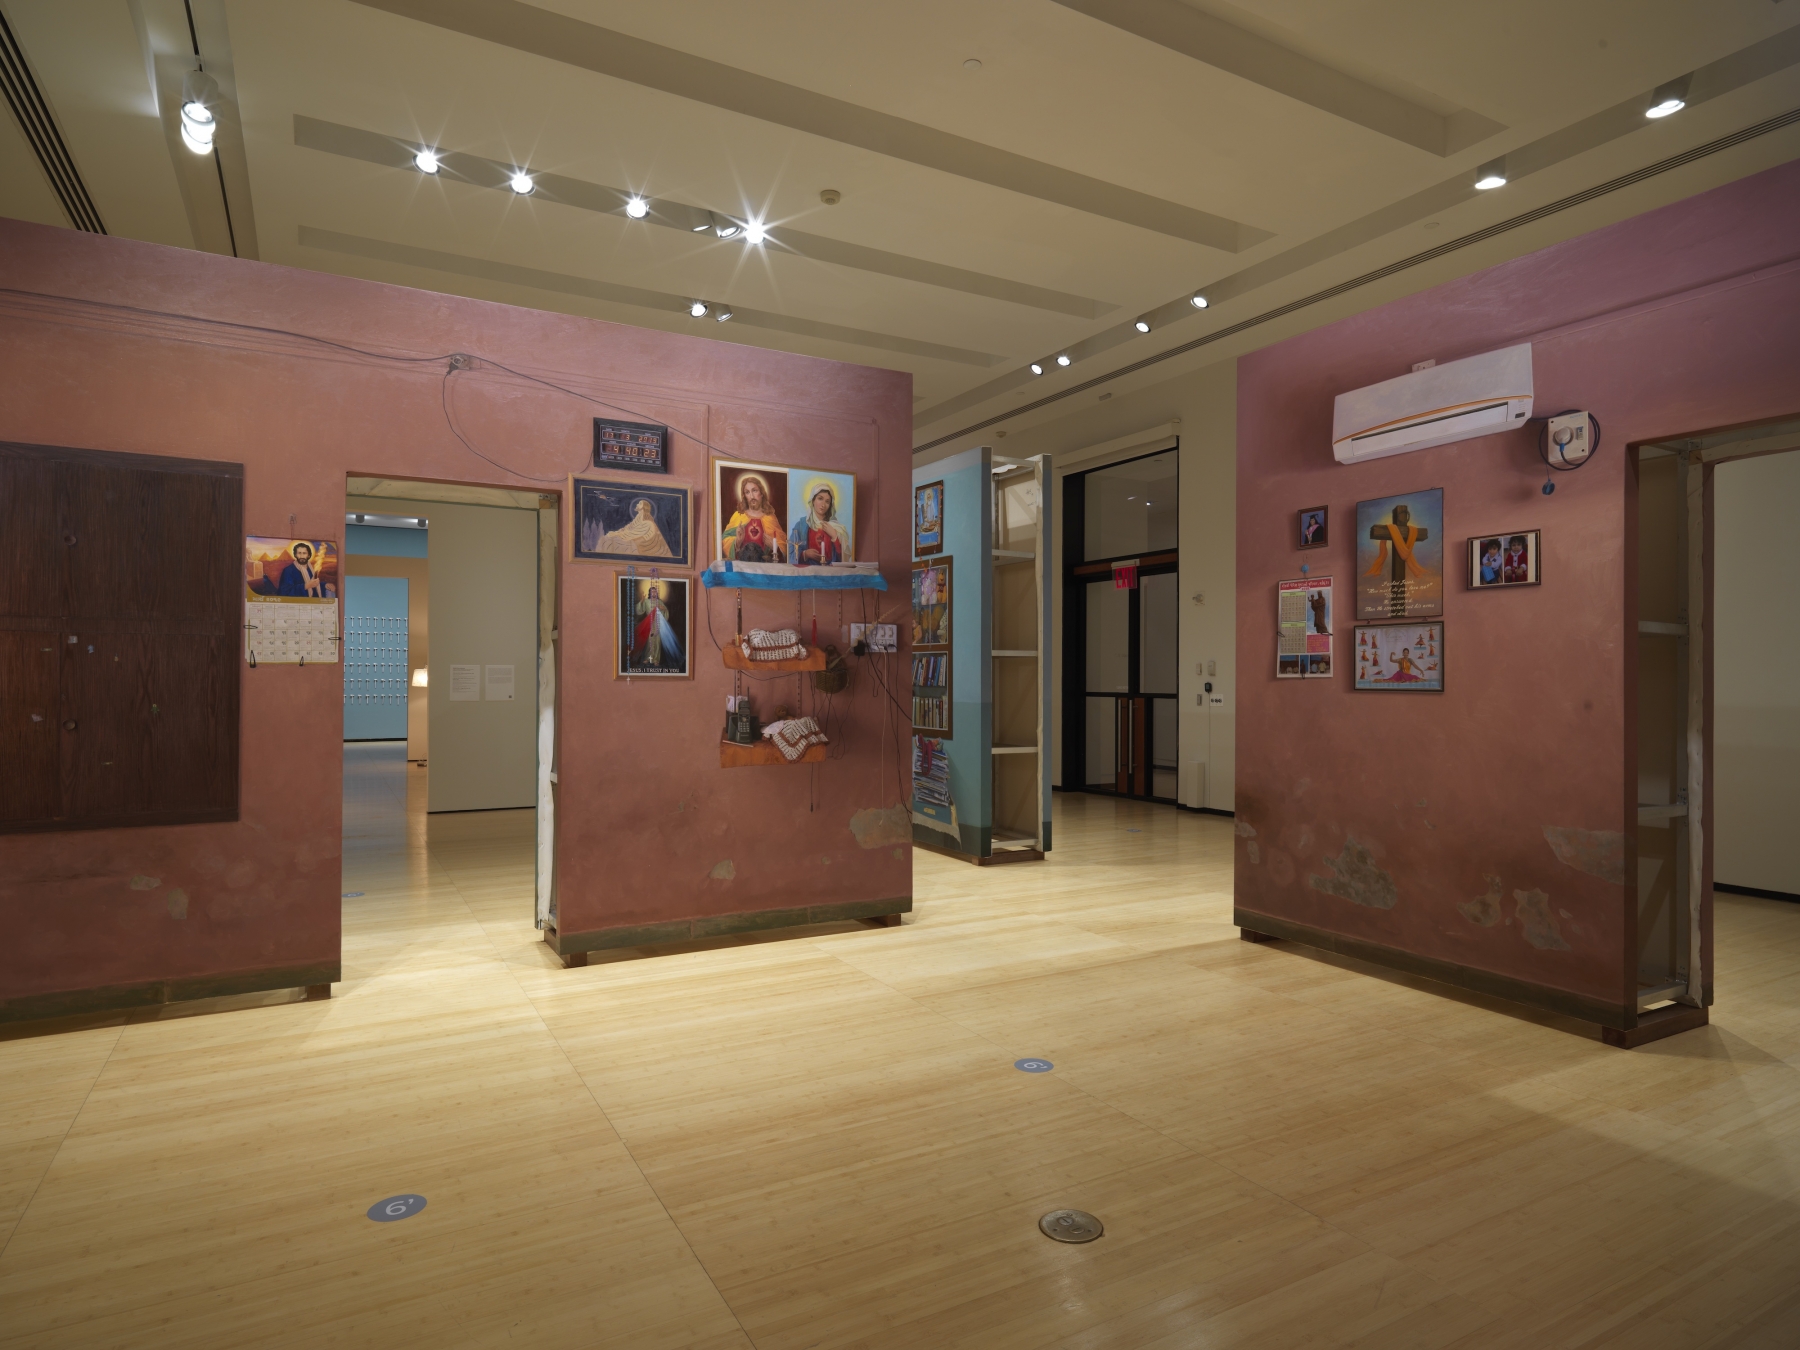 Installation view of Asia Society Triennial: &amp;ldquo;We Do Not Dream Alone&amp;rdquo; at Asia Society Museum, New York,&amp;nbsp;

October 27, 2020&amp;ndash;June 27, 2021.&amp;nbsp;Photograph &amp;copy; Bruce M. White, 2021, courtesy of Asia Society